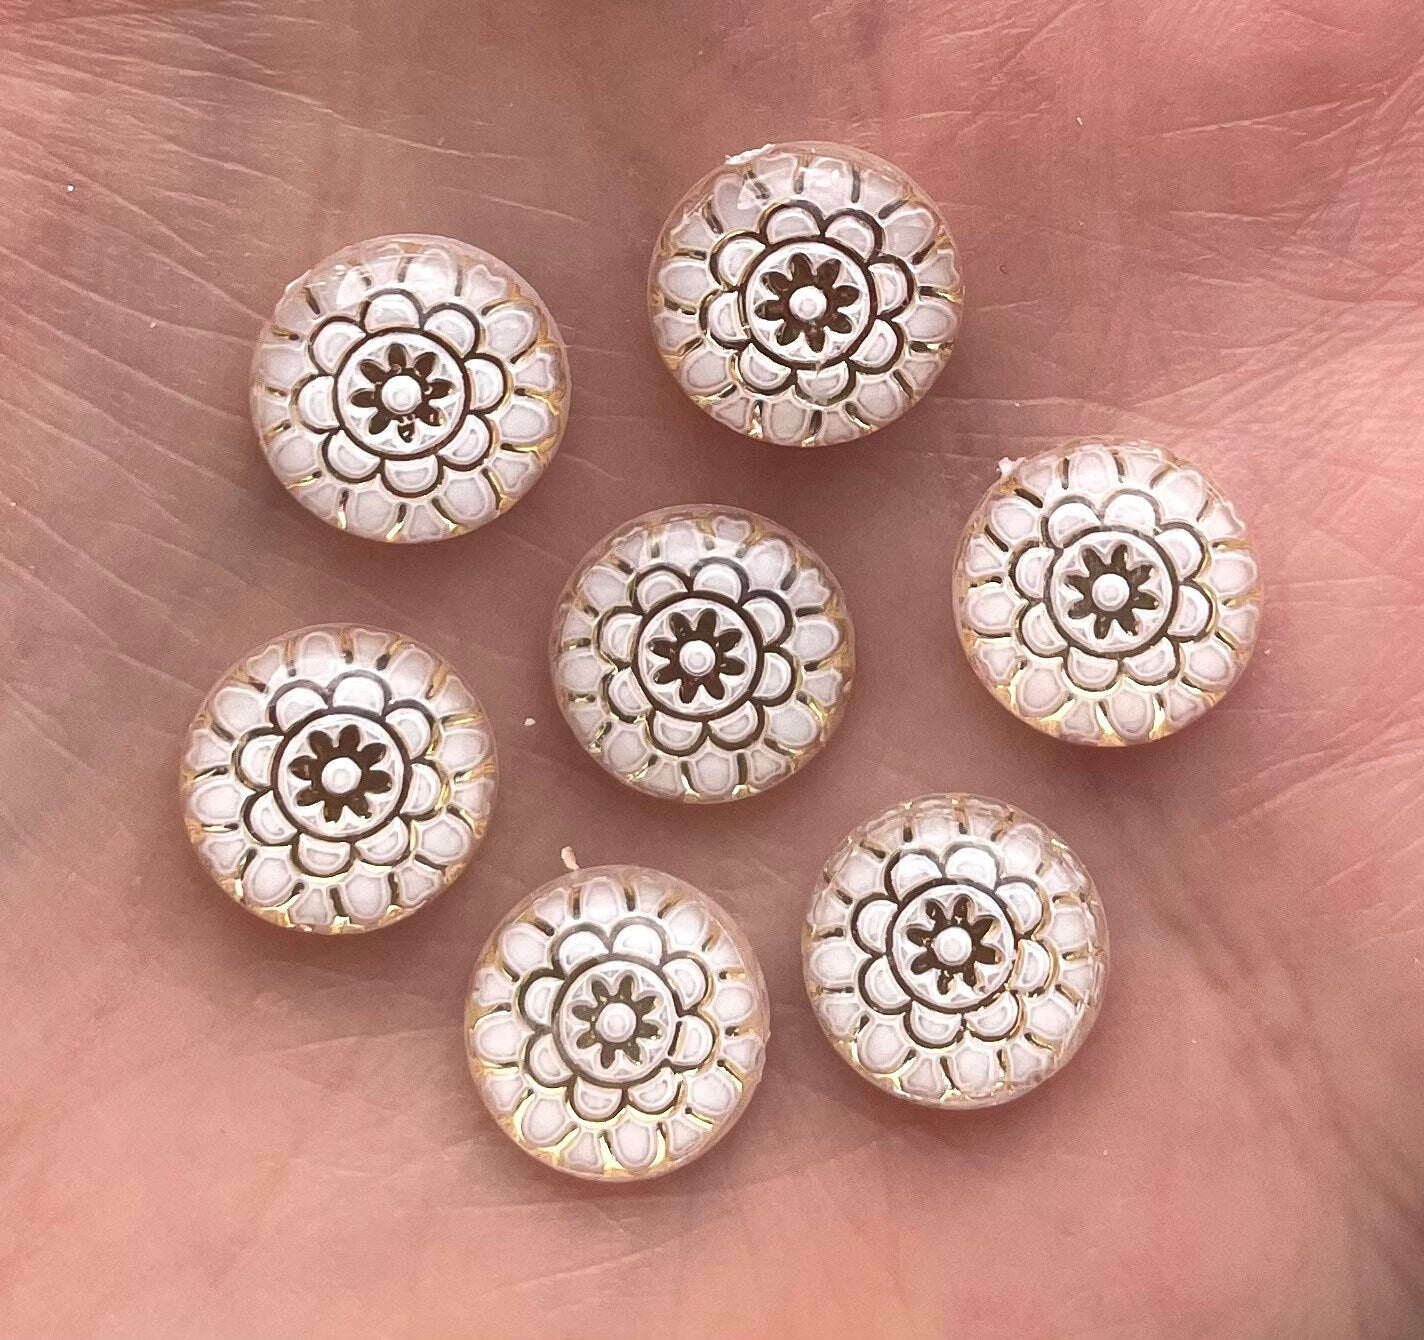 Round patterned cabochon, 10mm white